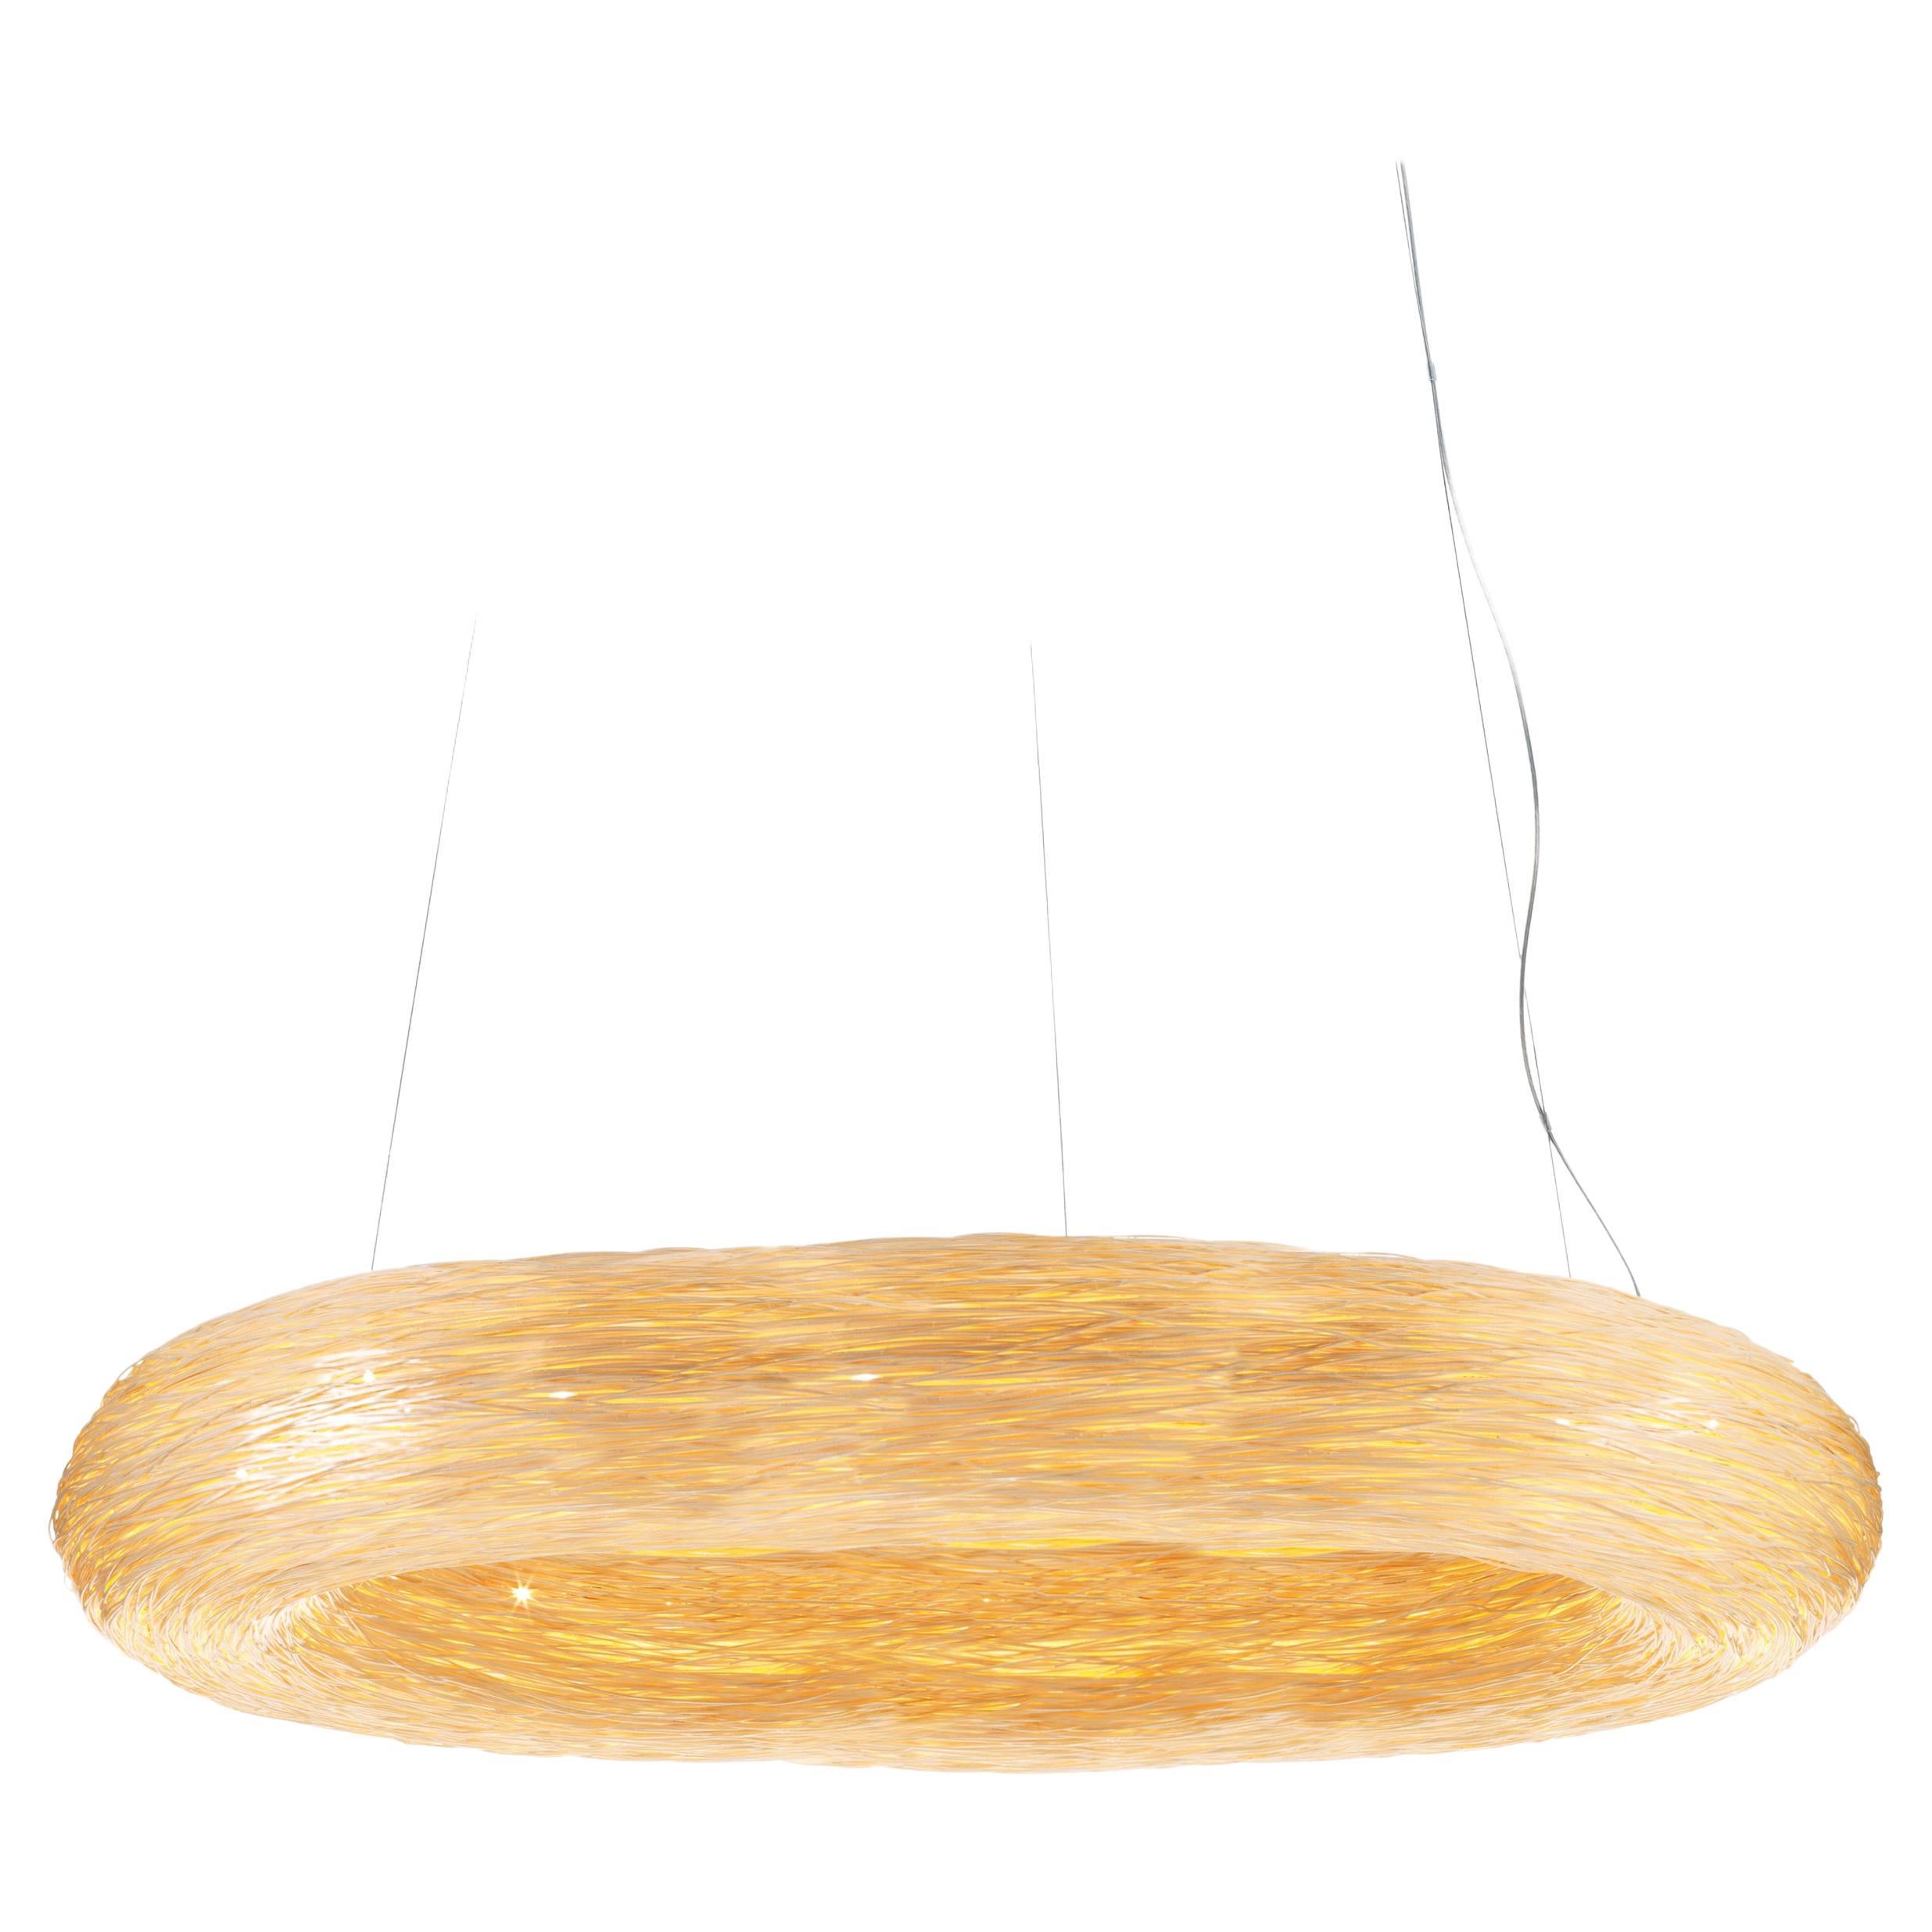 Yellow Crown 1100 by Ango, Hand-Woven Pendant Light in a Timeless Circular Form